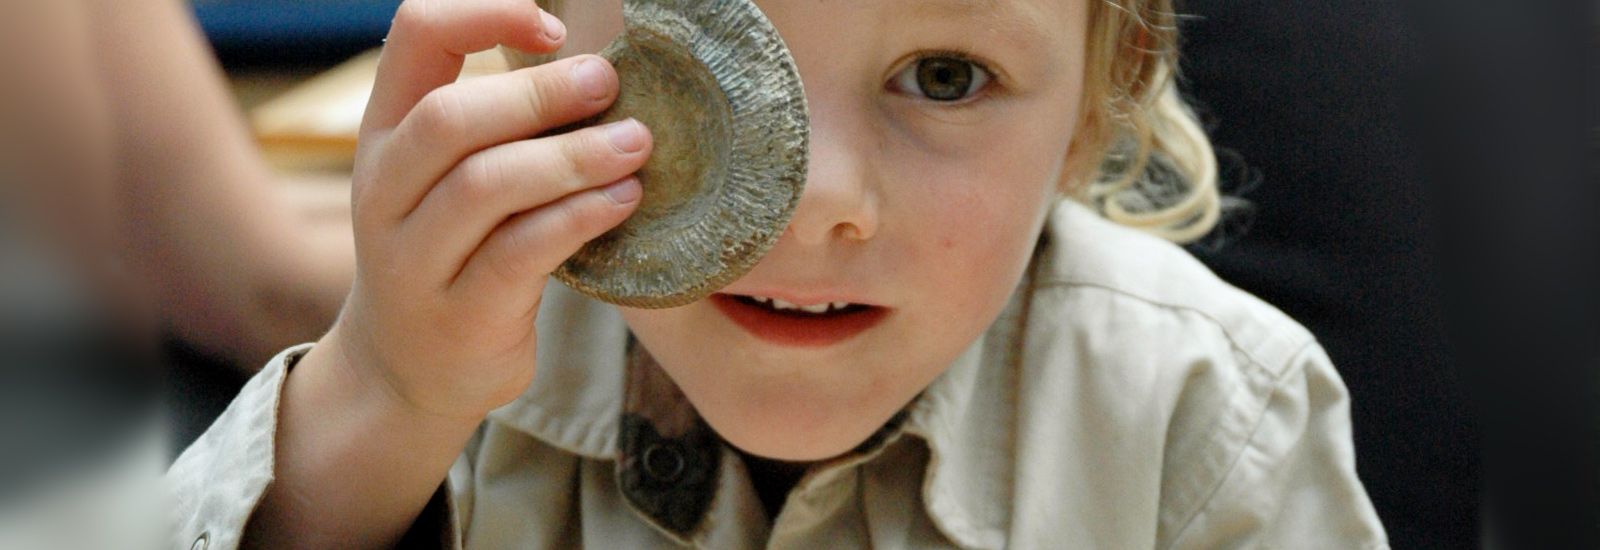 little boy with fossil